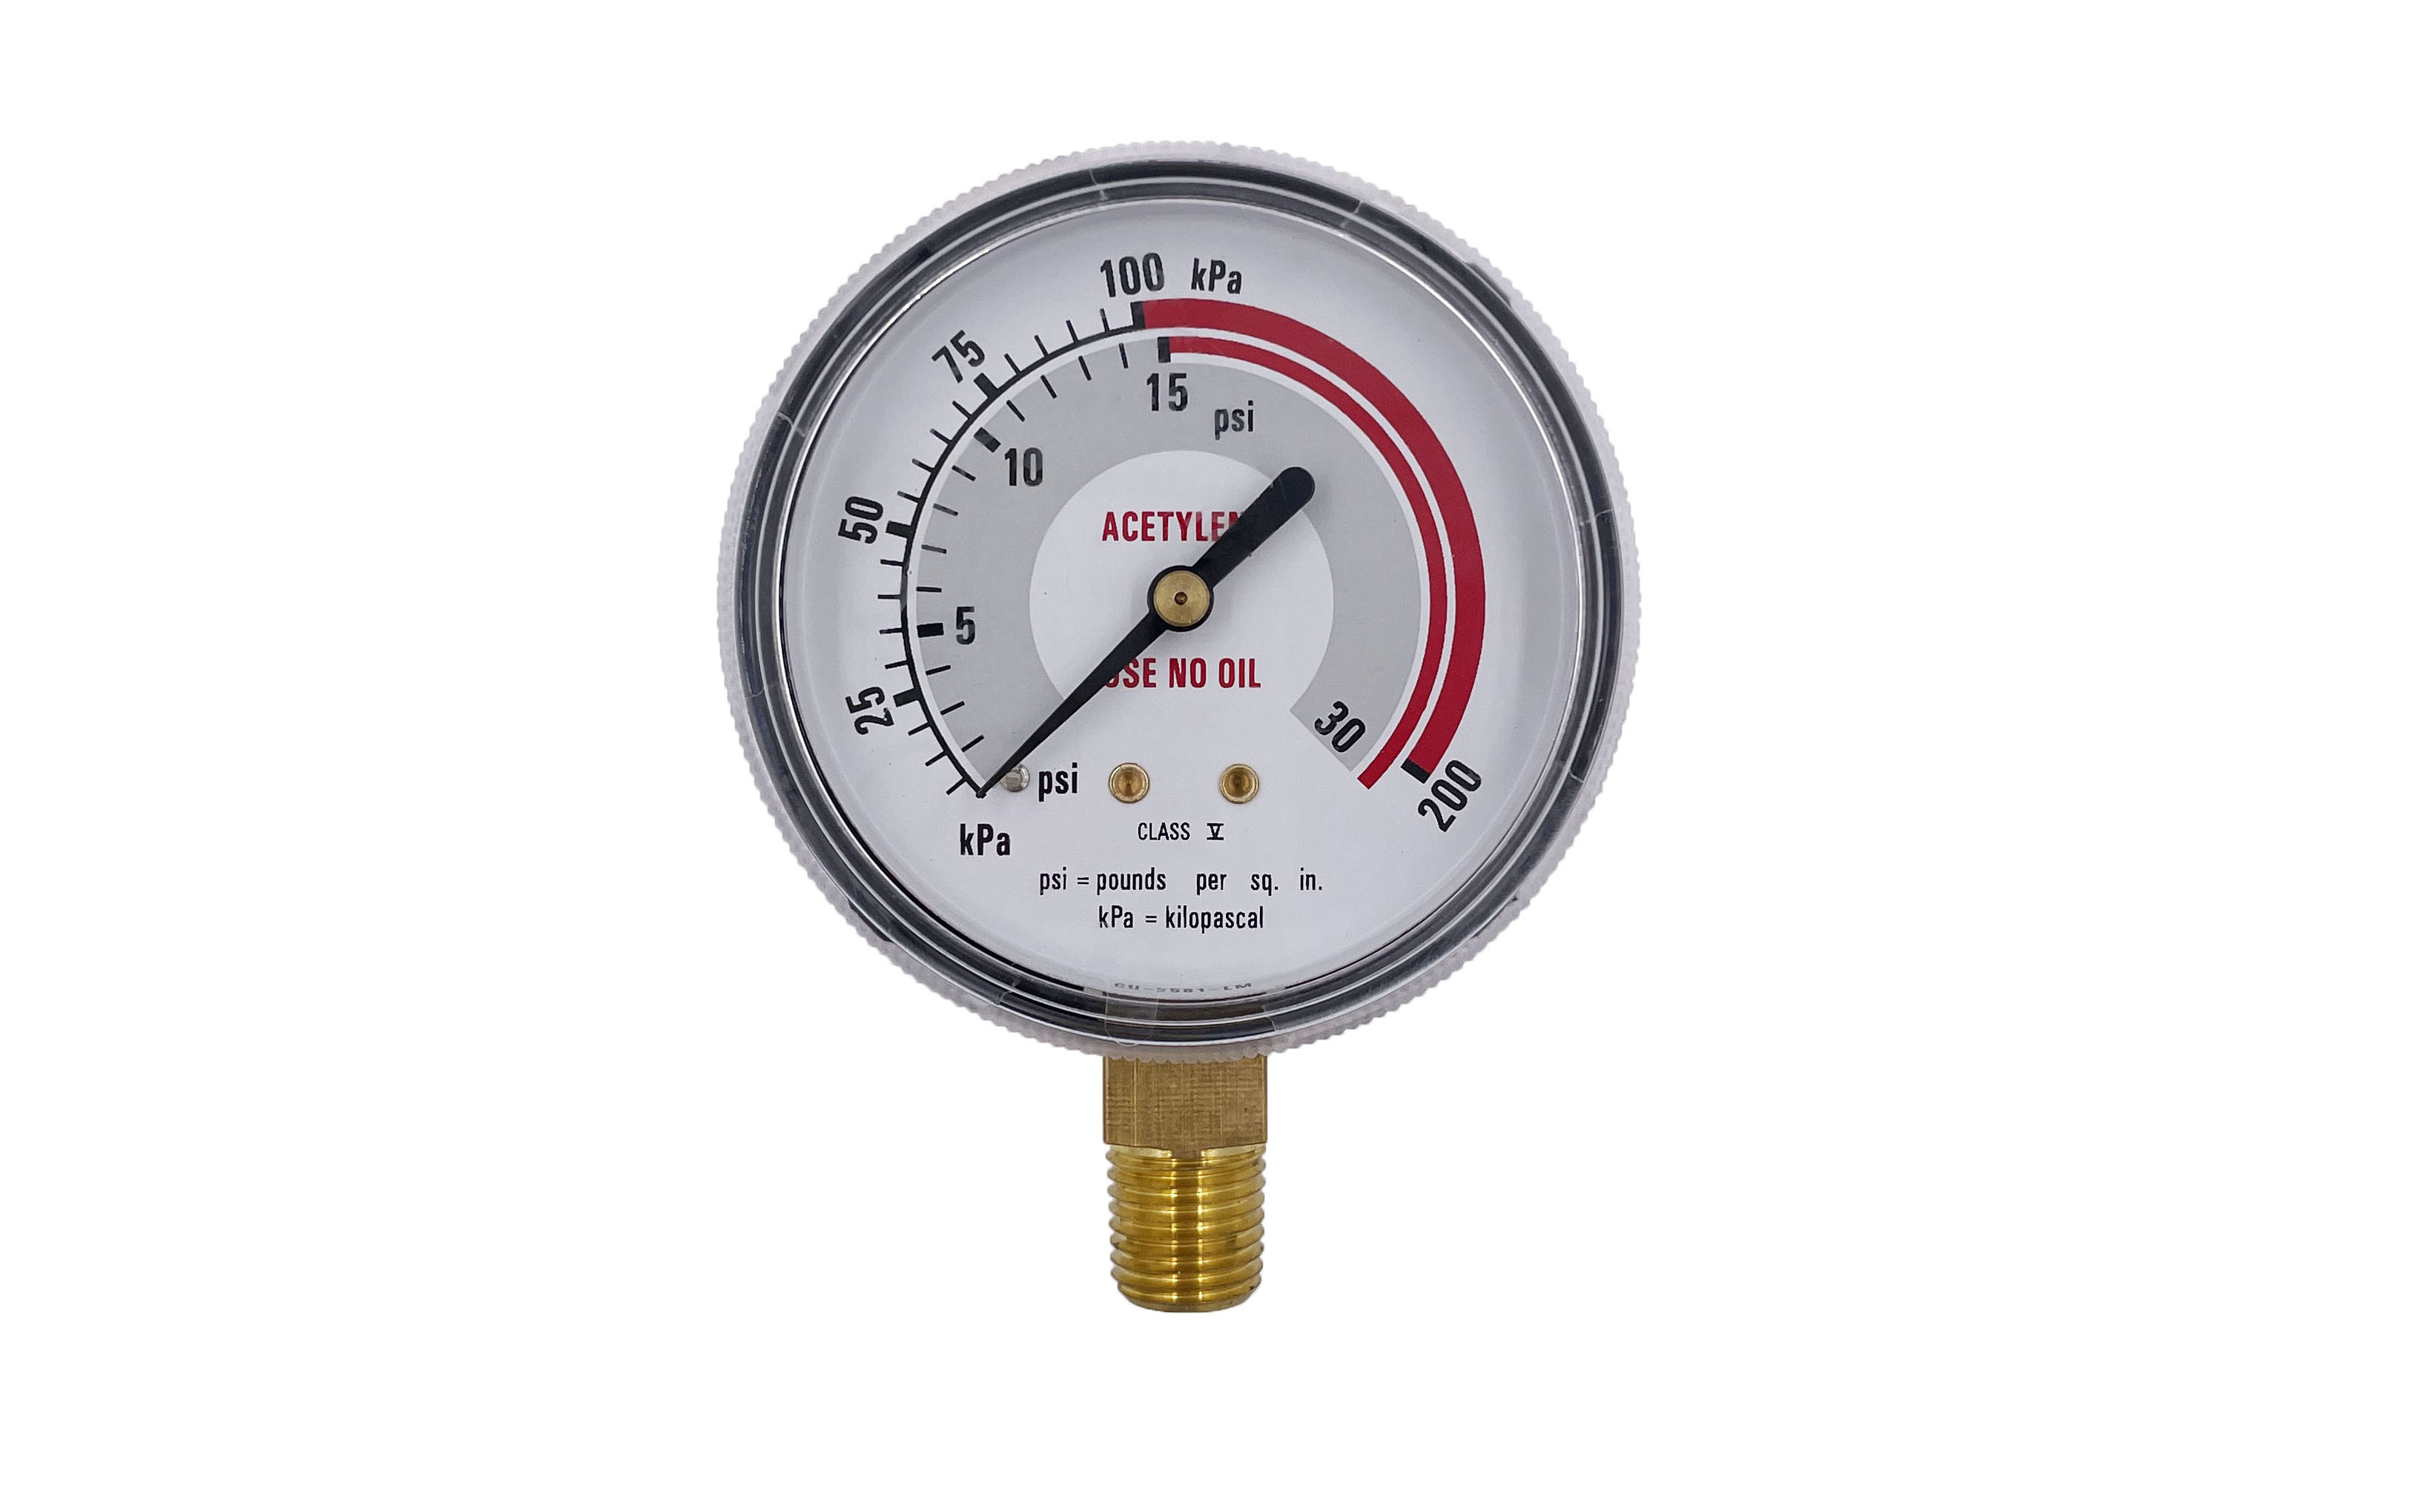 Manitoba a company bought a batch of pressure gauges